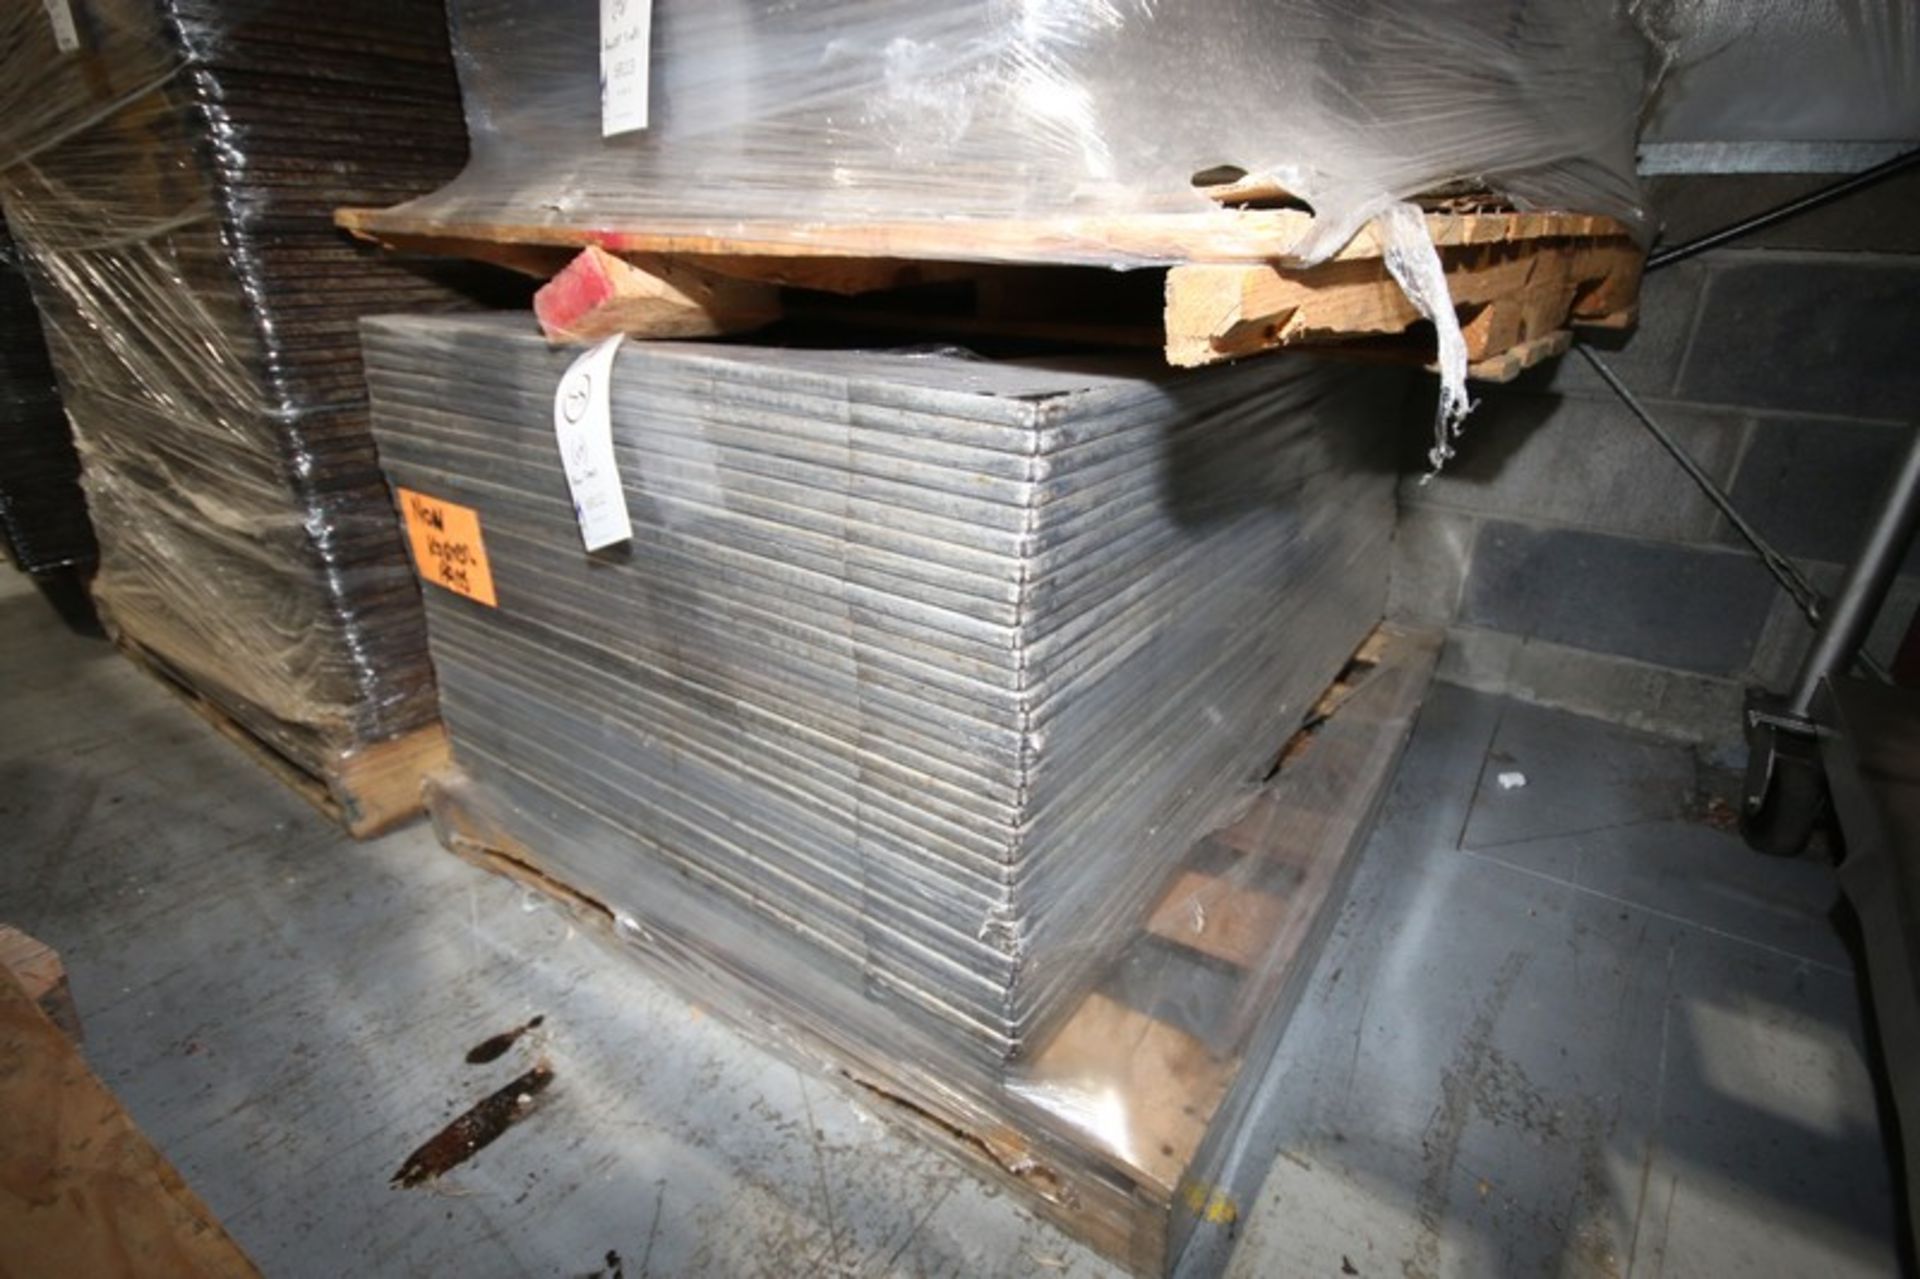 Bun Trays, Aprox. 5" x 24 Position, 23" W x 32" L (INV# 69112) (Rigging, Loading, & Site - Image 2 of 2